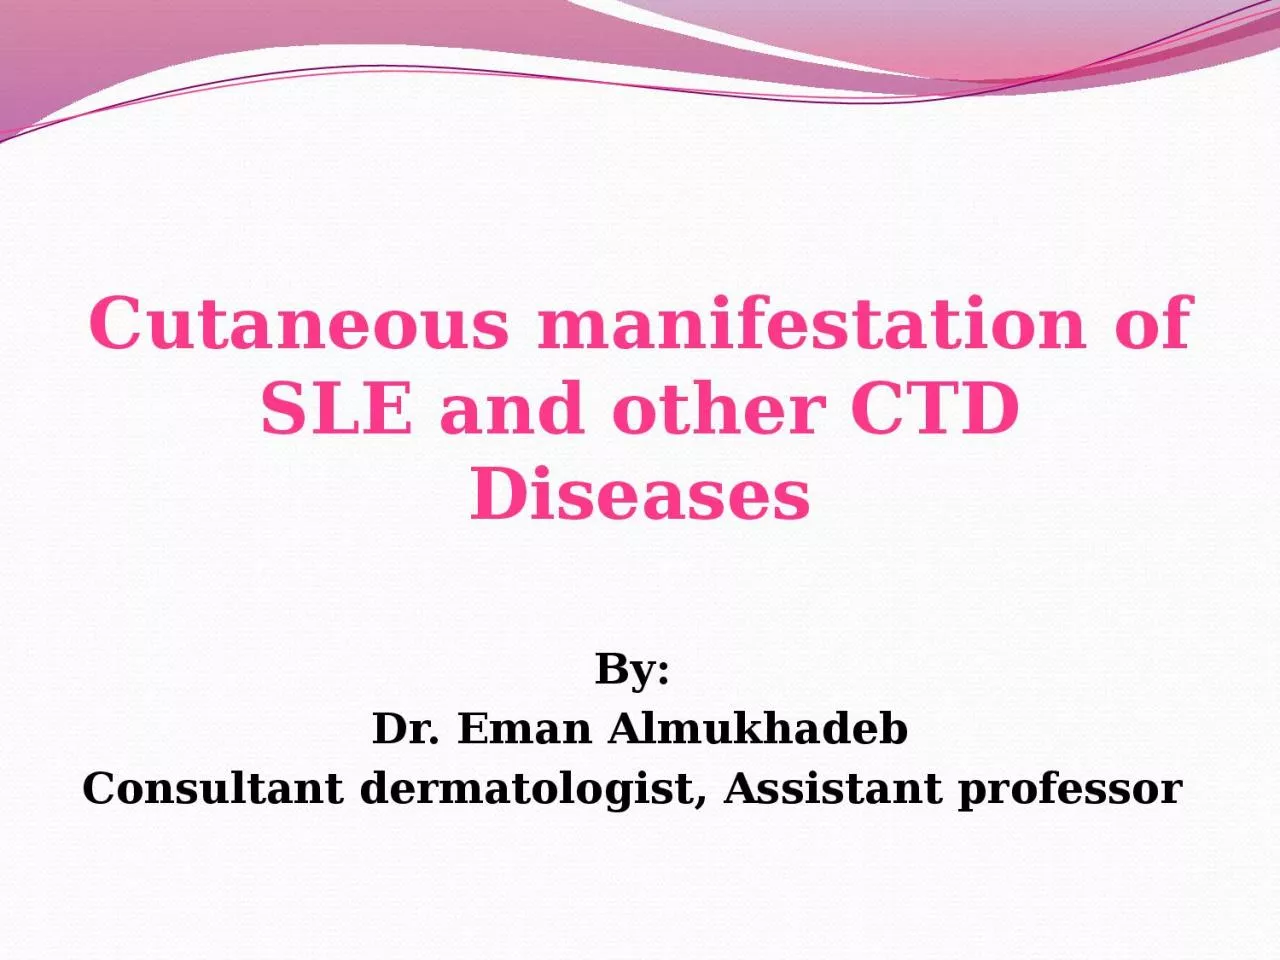 Cutaneous manifestation of SLE and other CTD